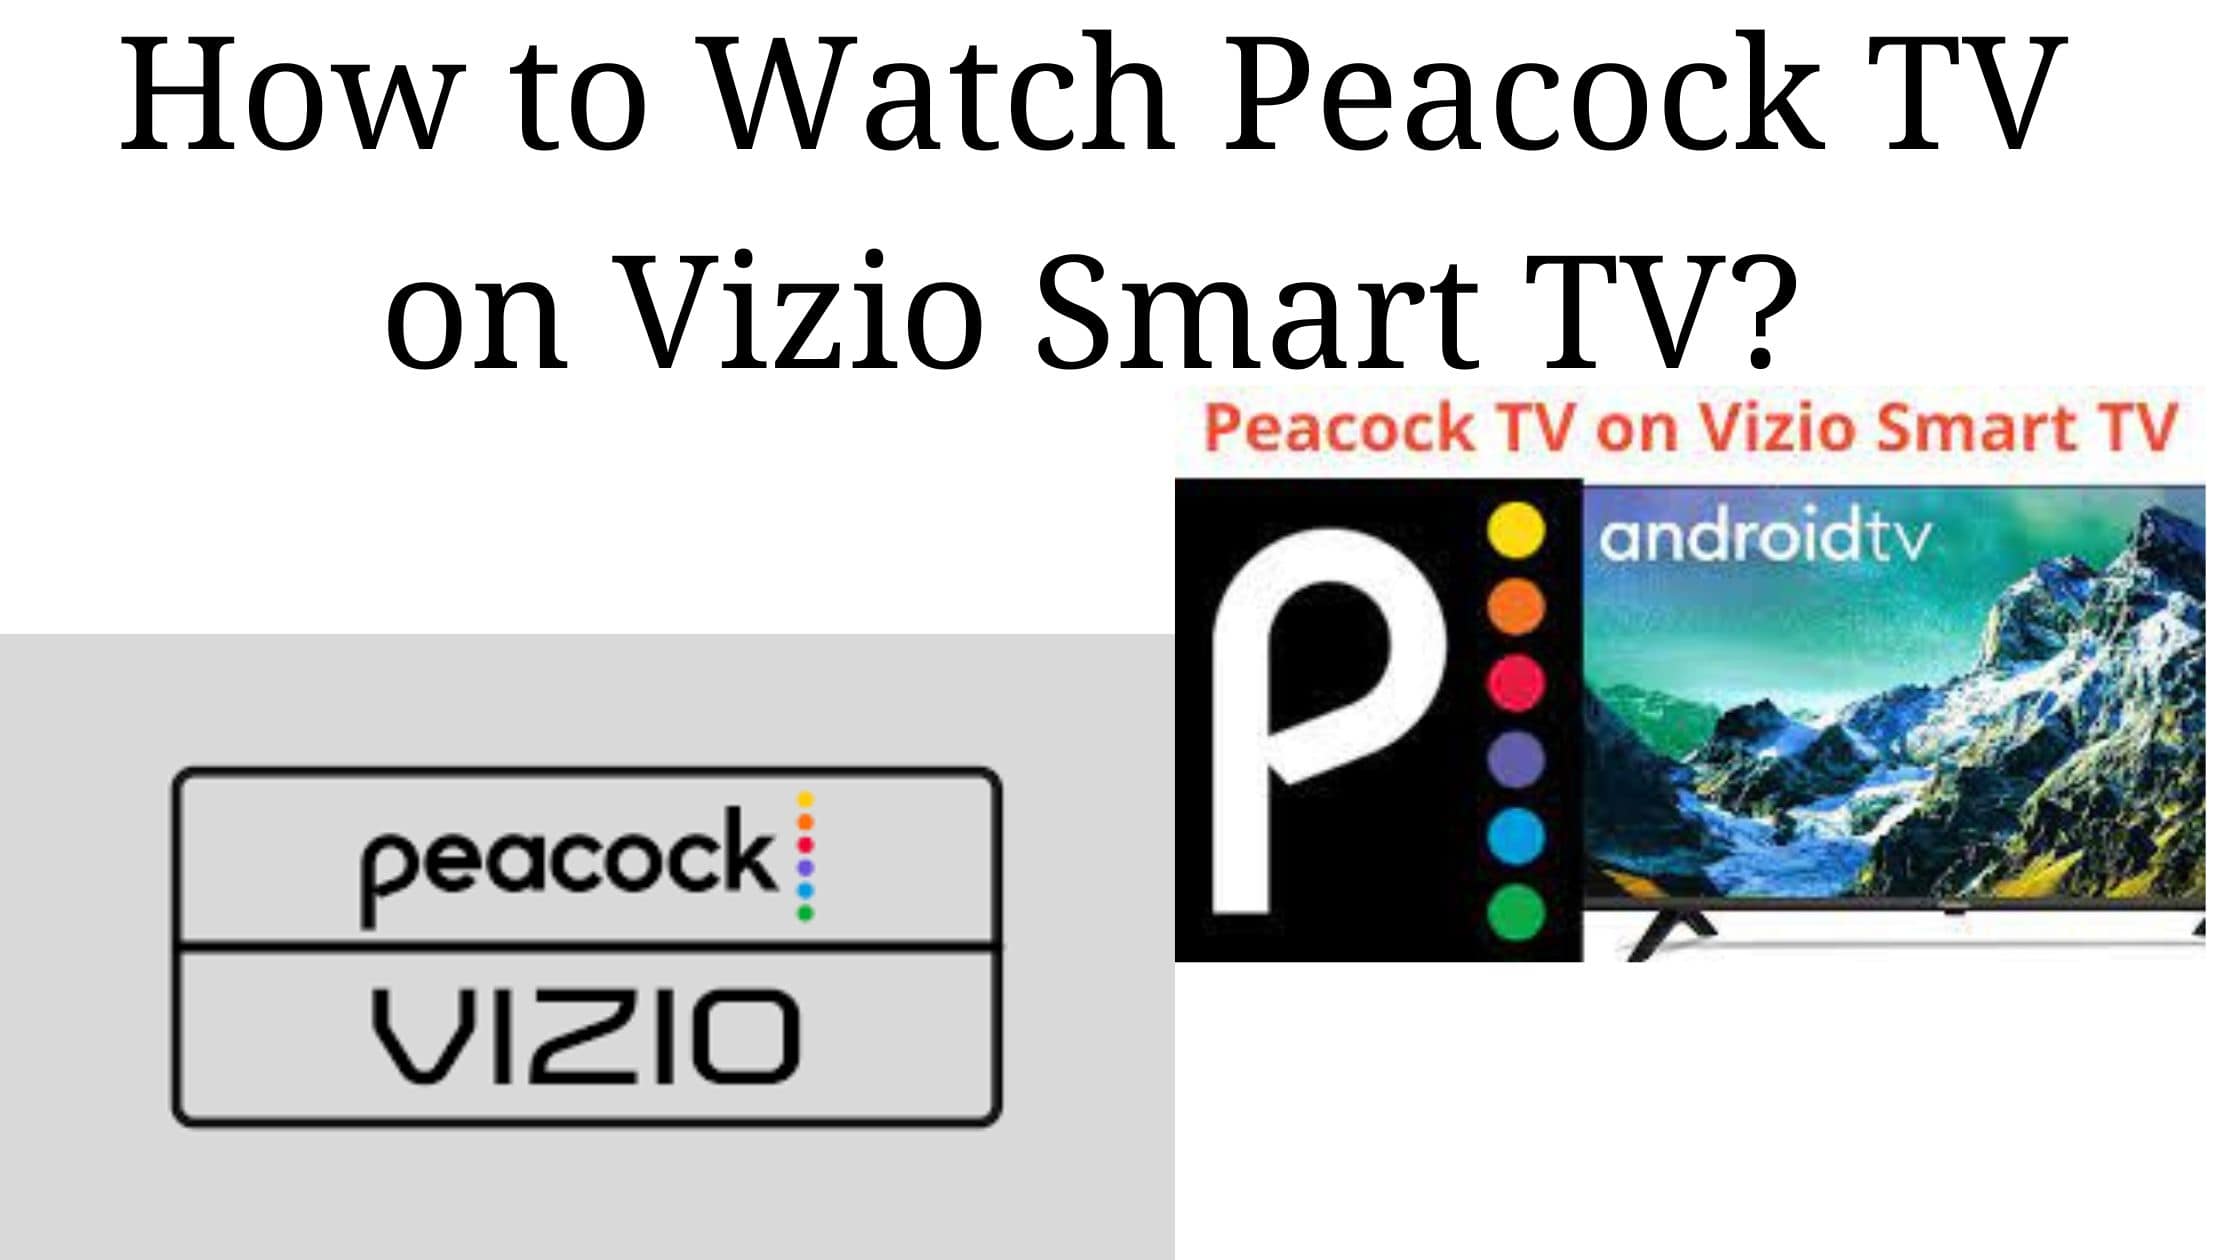 How to Watch Peacock TV on Vizio Smart TV